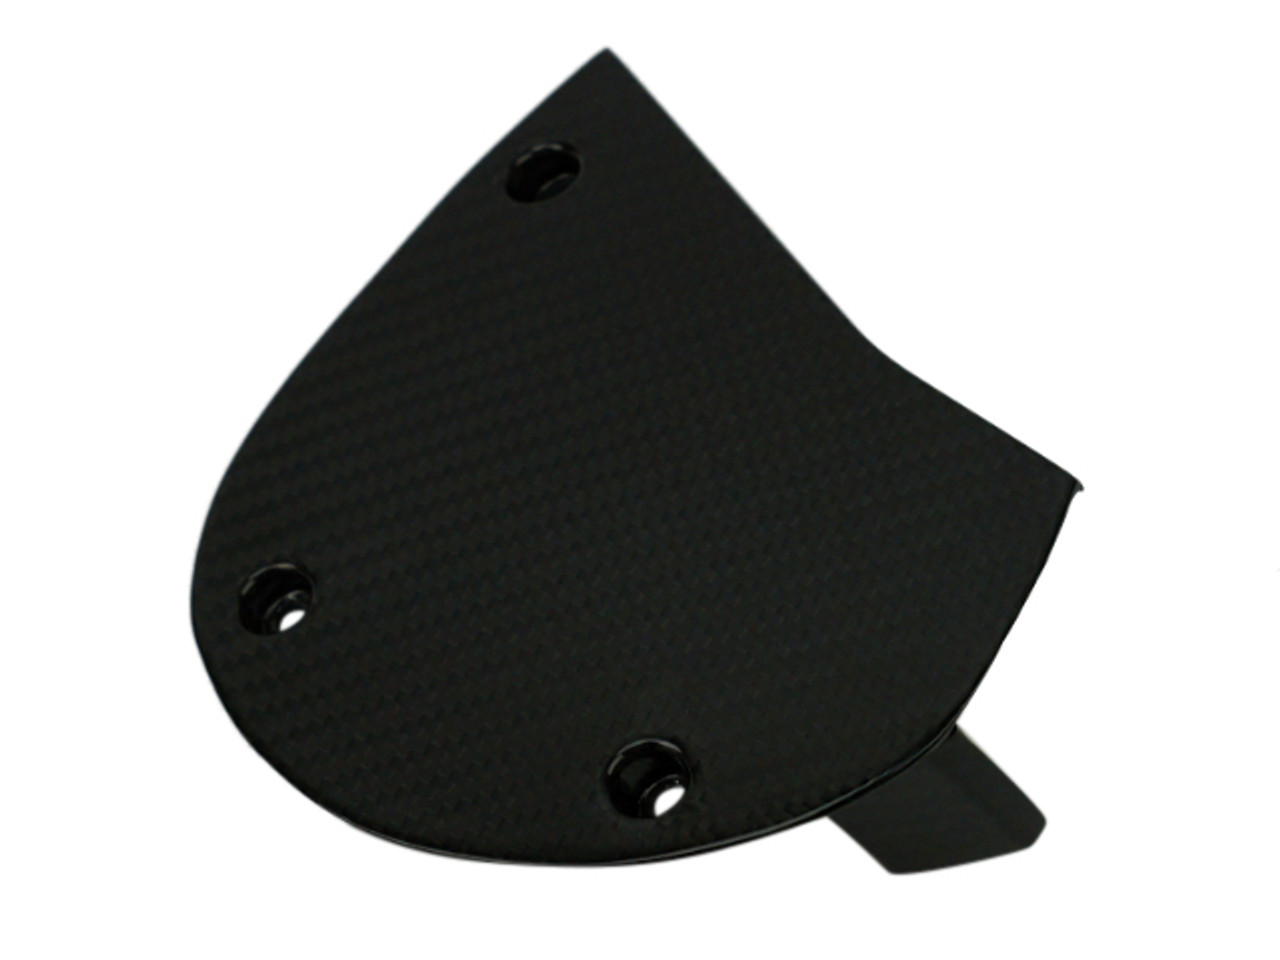 Sprocket Cover in Glossy Twill Weave Carbon Fiber for Ducati 600SS, 750SS 1991+